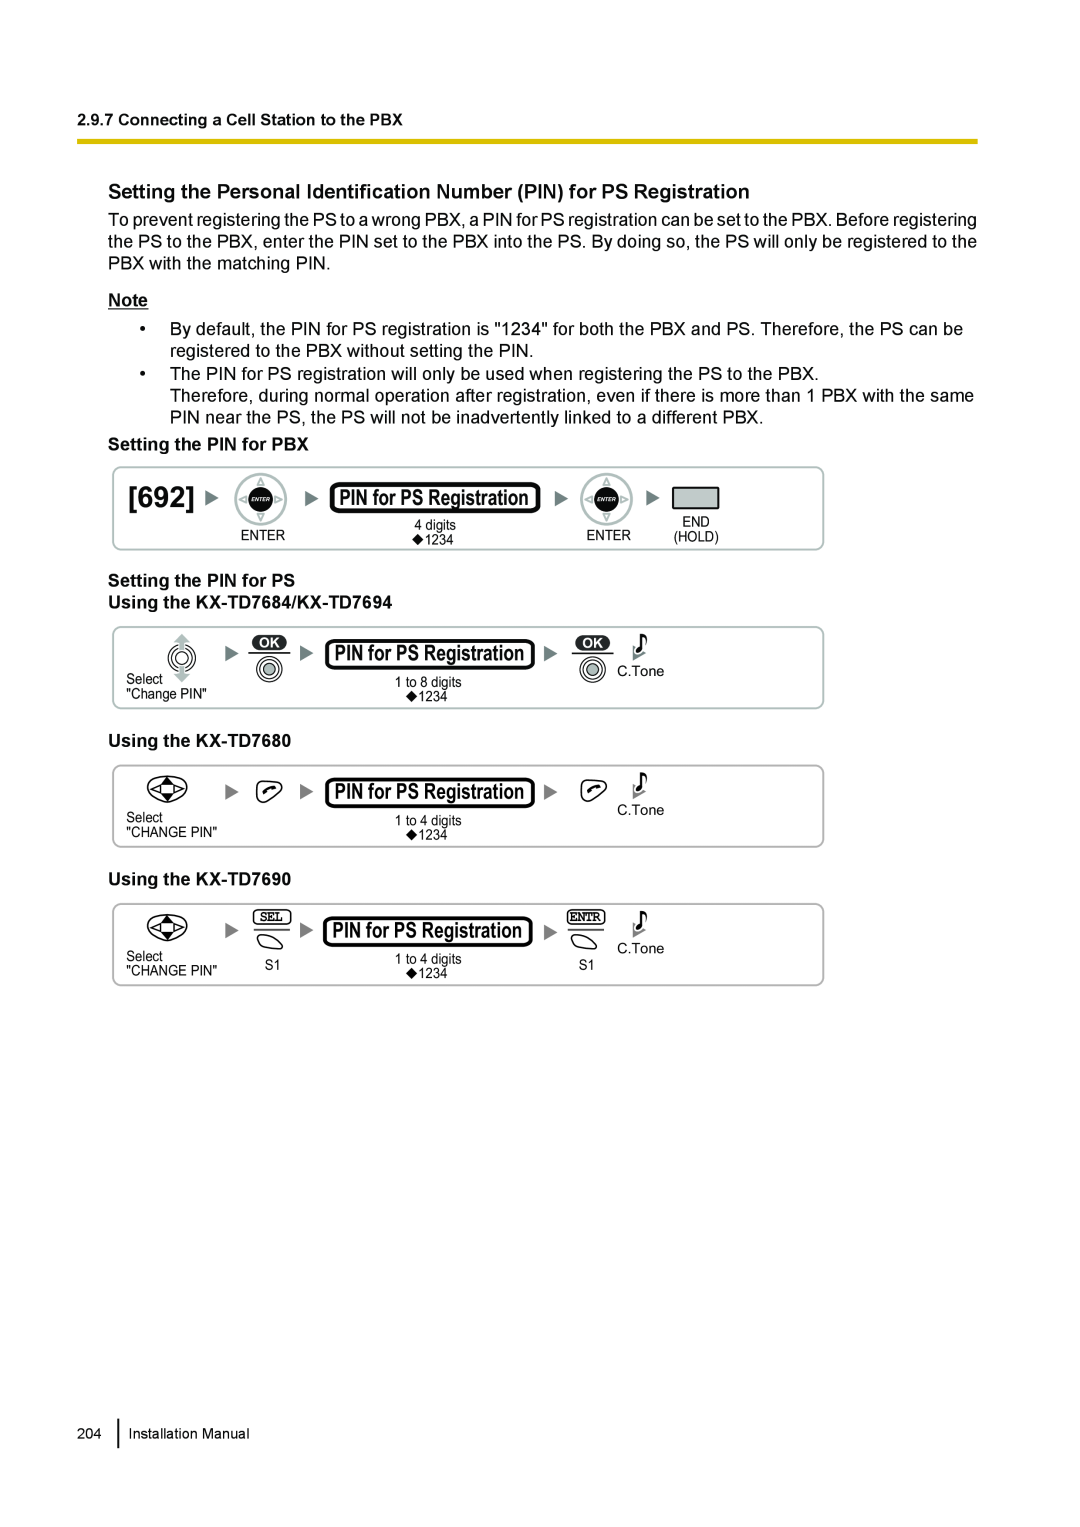 Panasonic KX-TDA100 Setting the Personal Identification Number PIN for PS Registration, Setting the PIN for PBX 